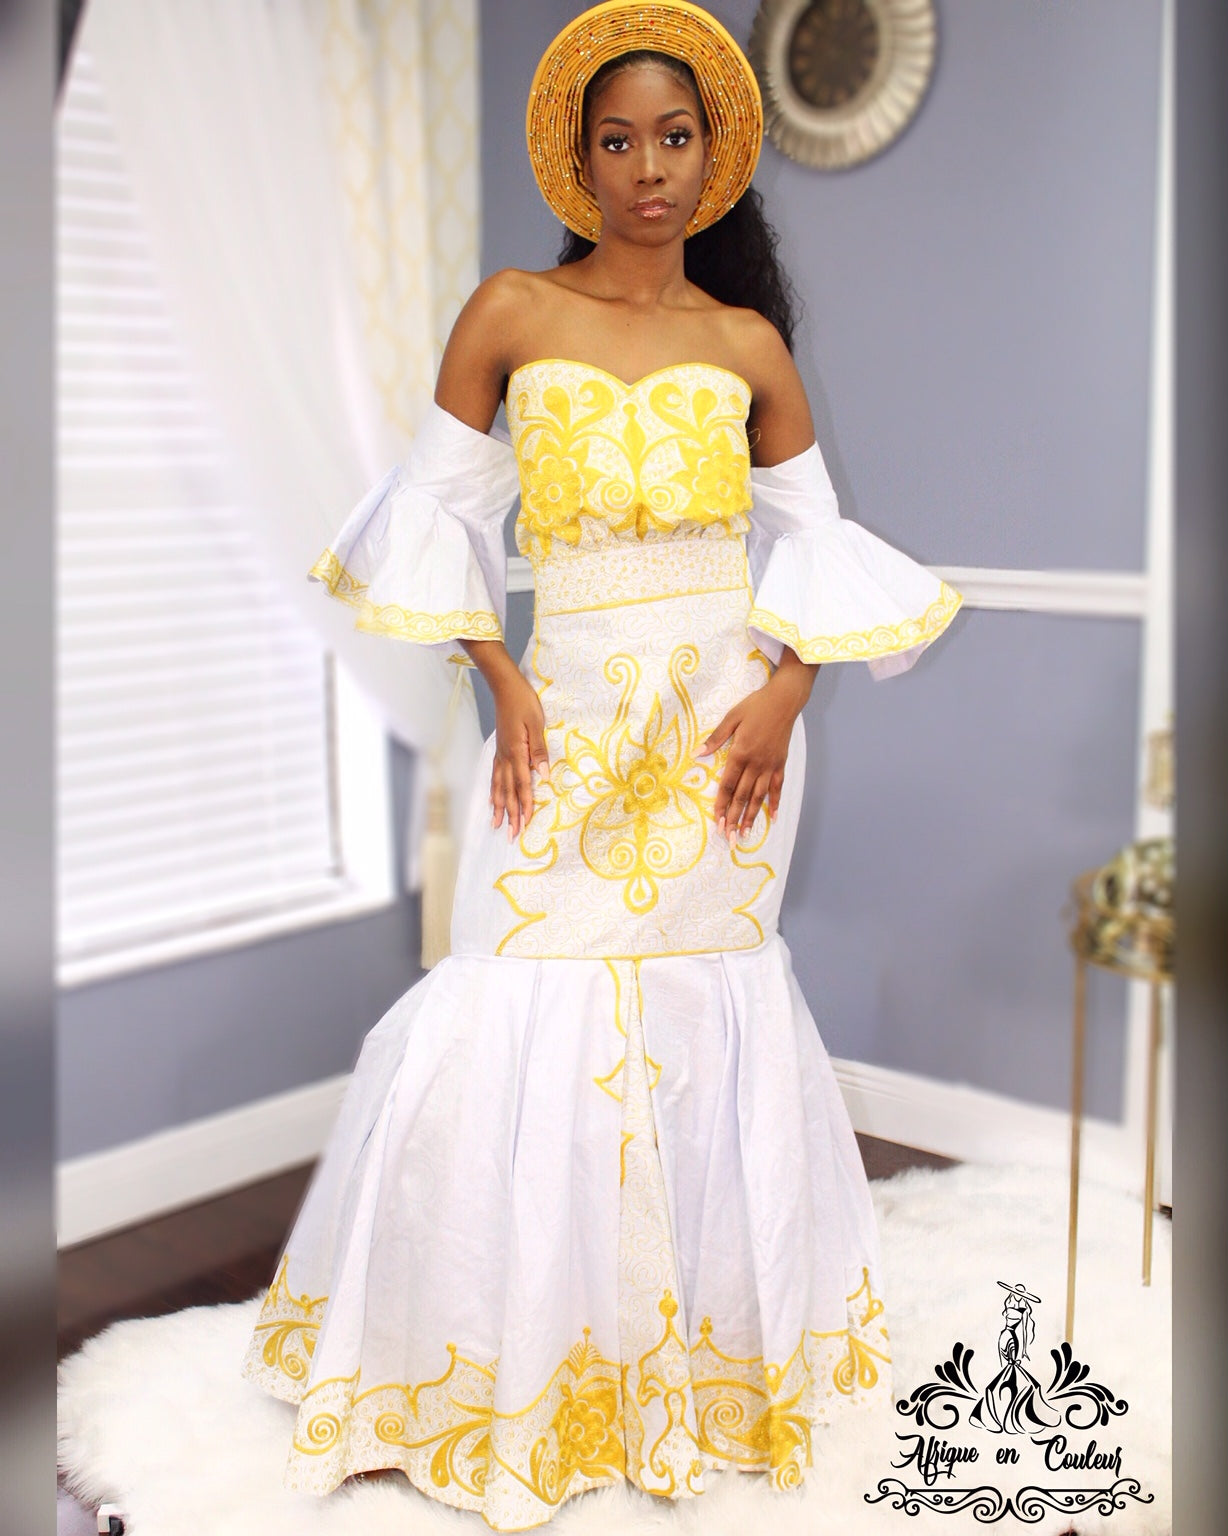 "Dripping In Gold" Women's Embroidery Gown